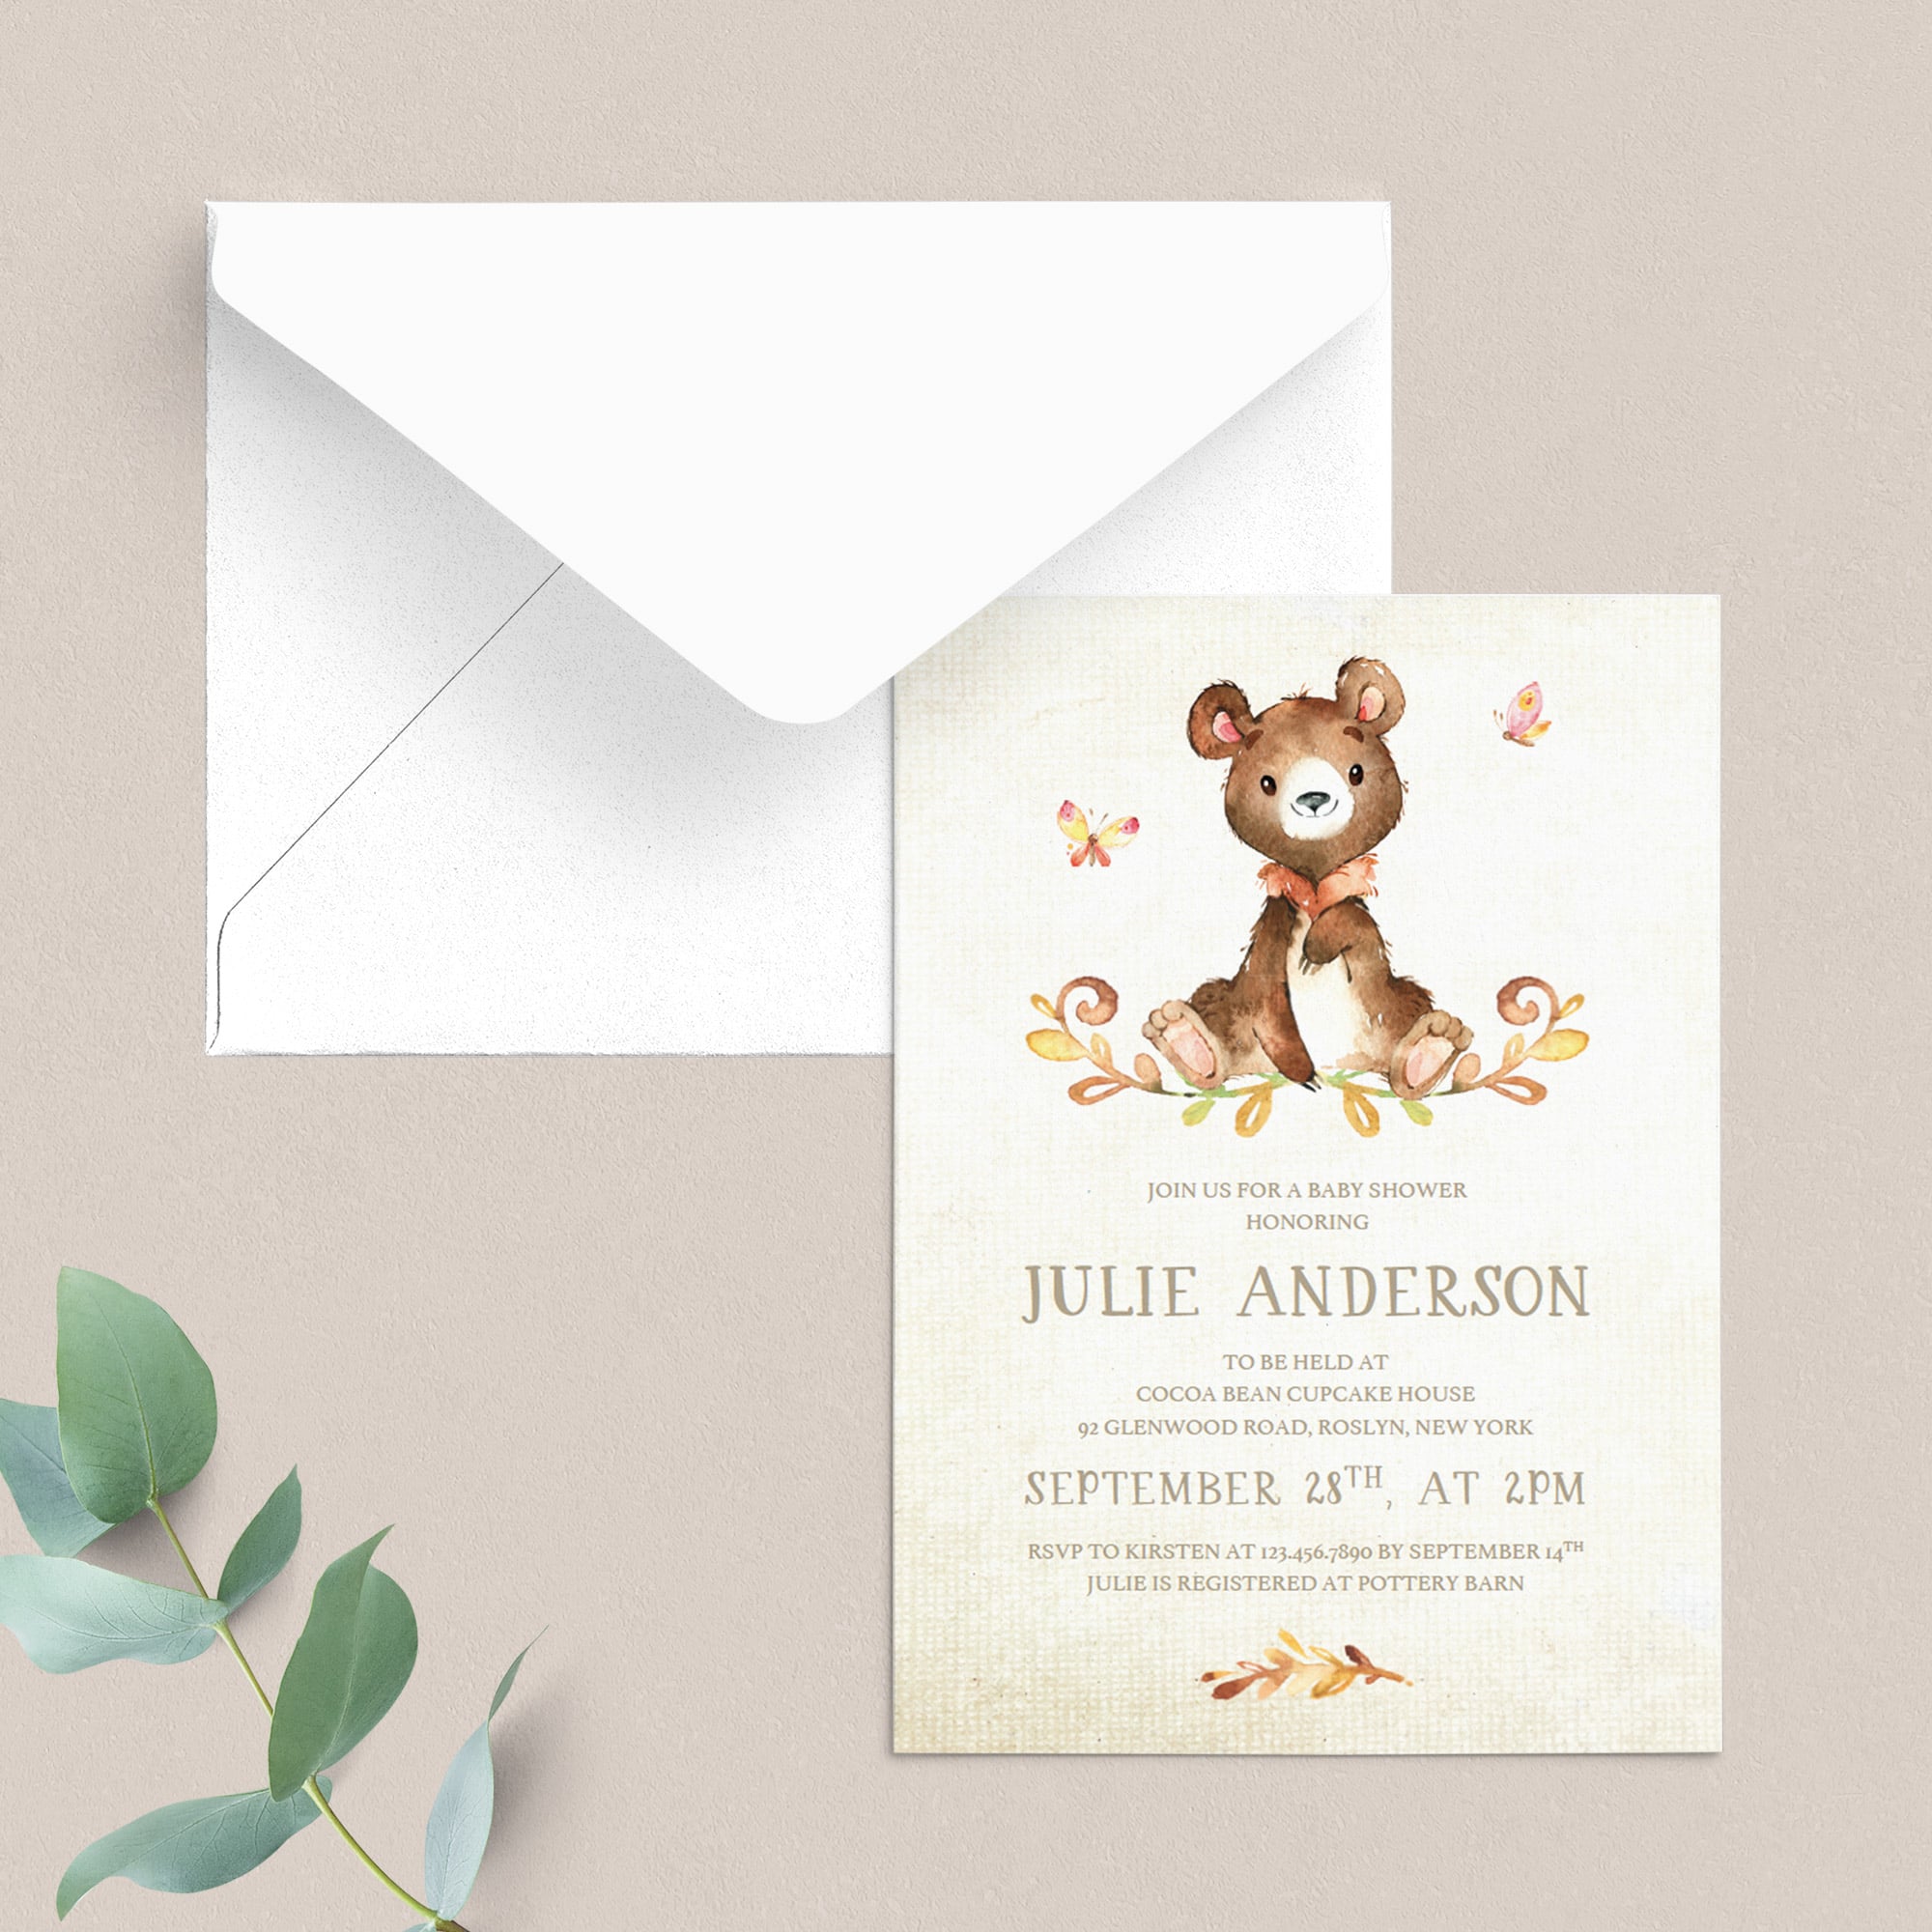 DIY baby shower invitations neutral theme by LittleSizzle